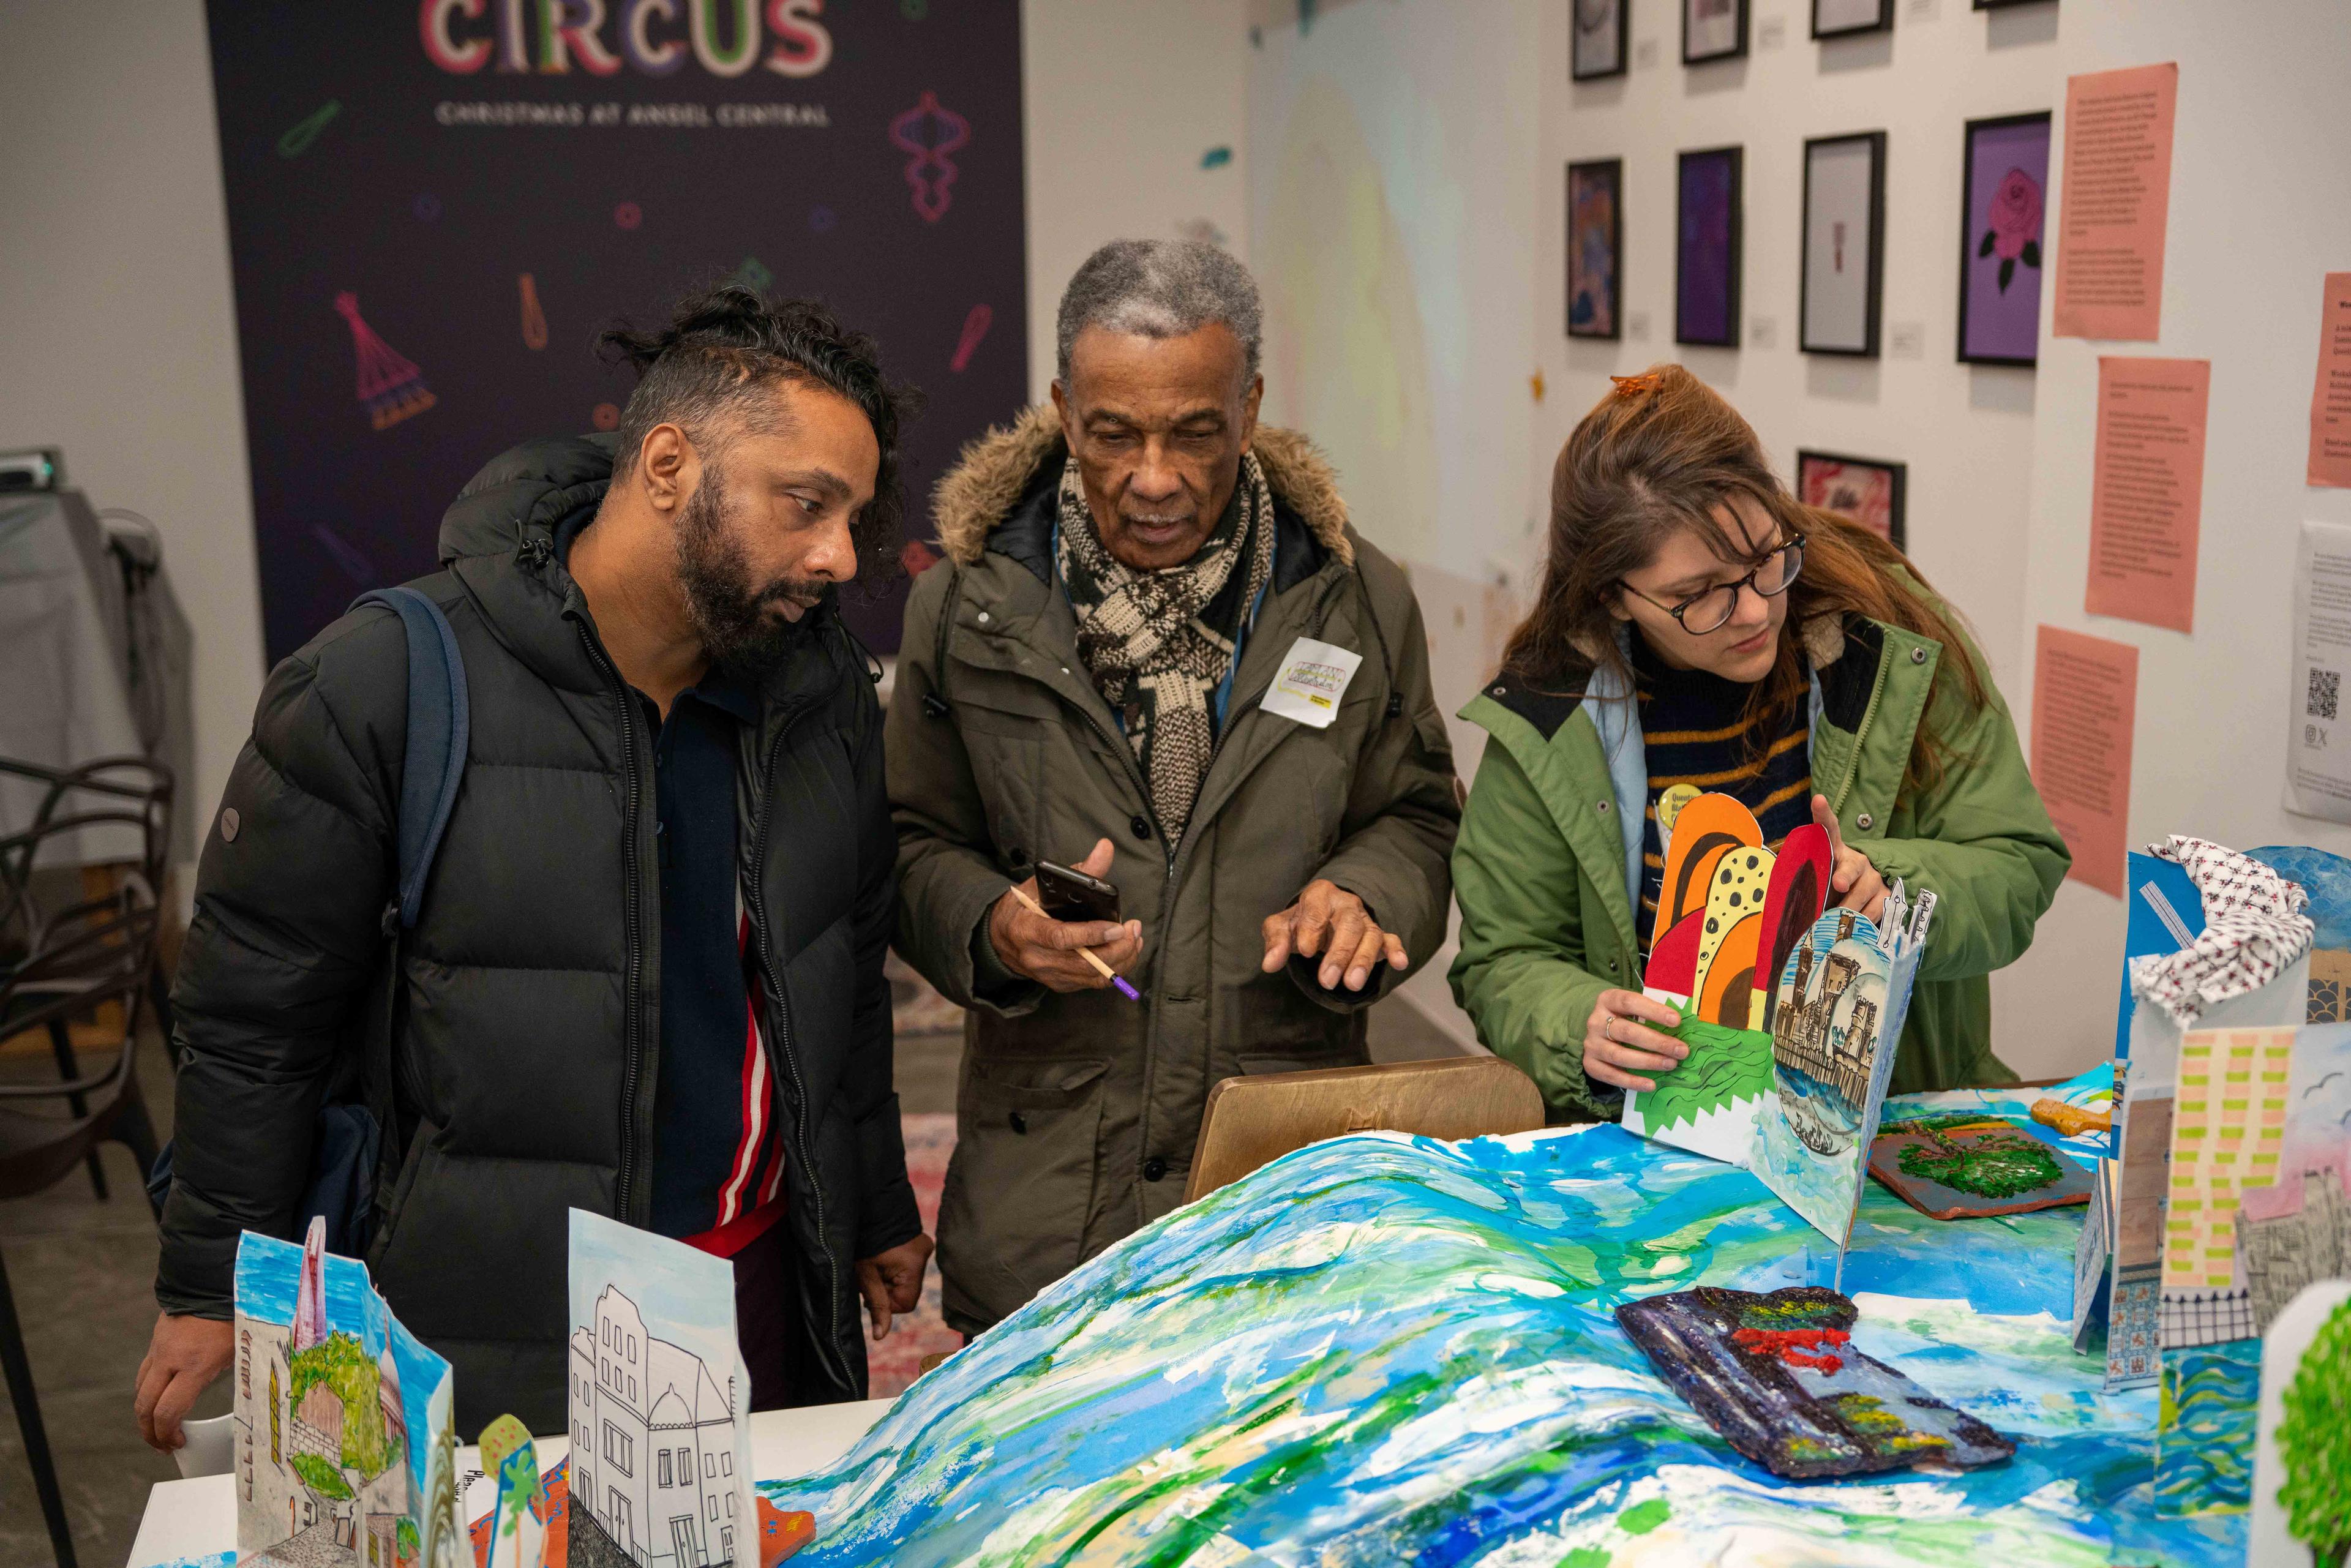 Three people look at an exhibition of illustration and sculpture.